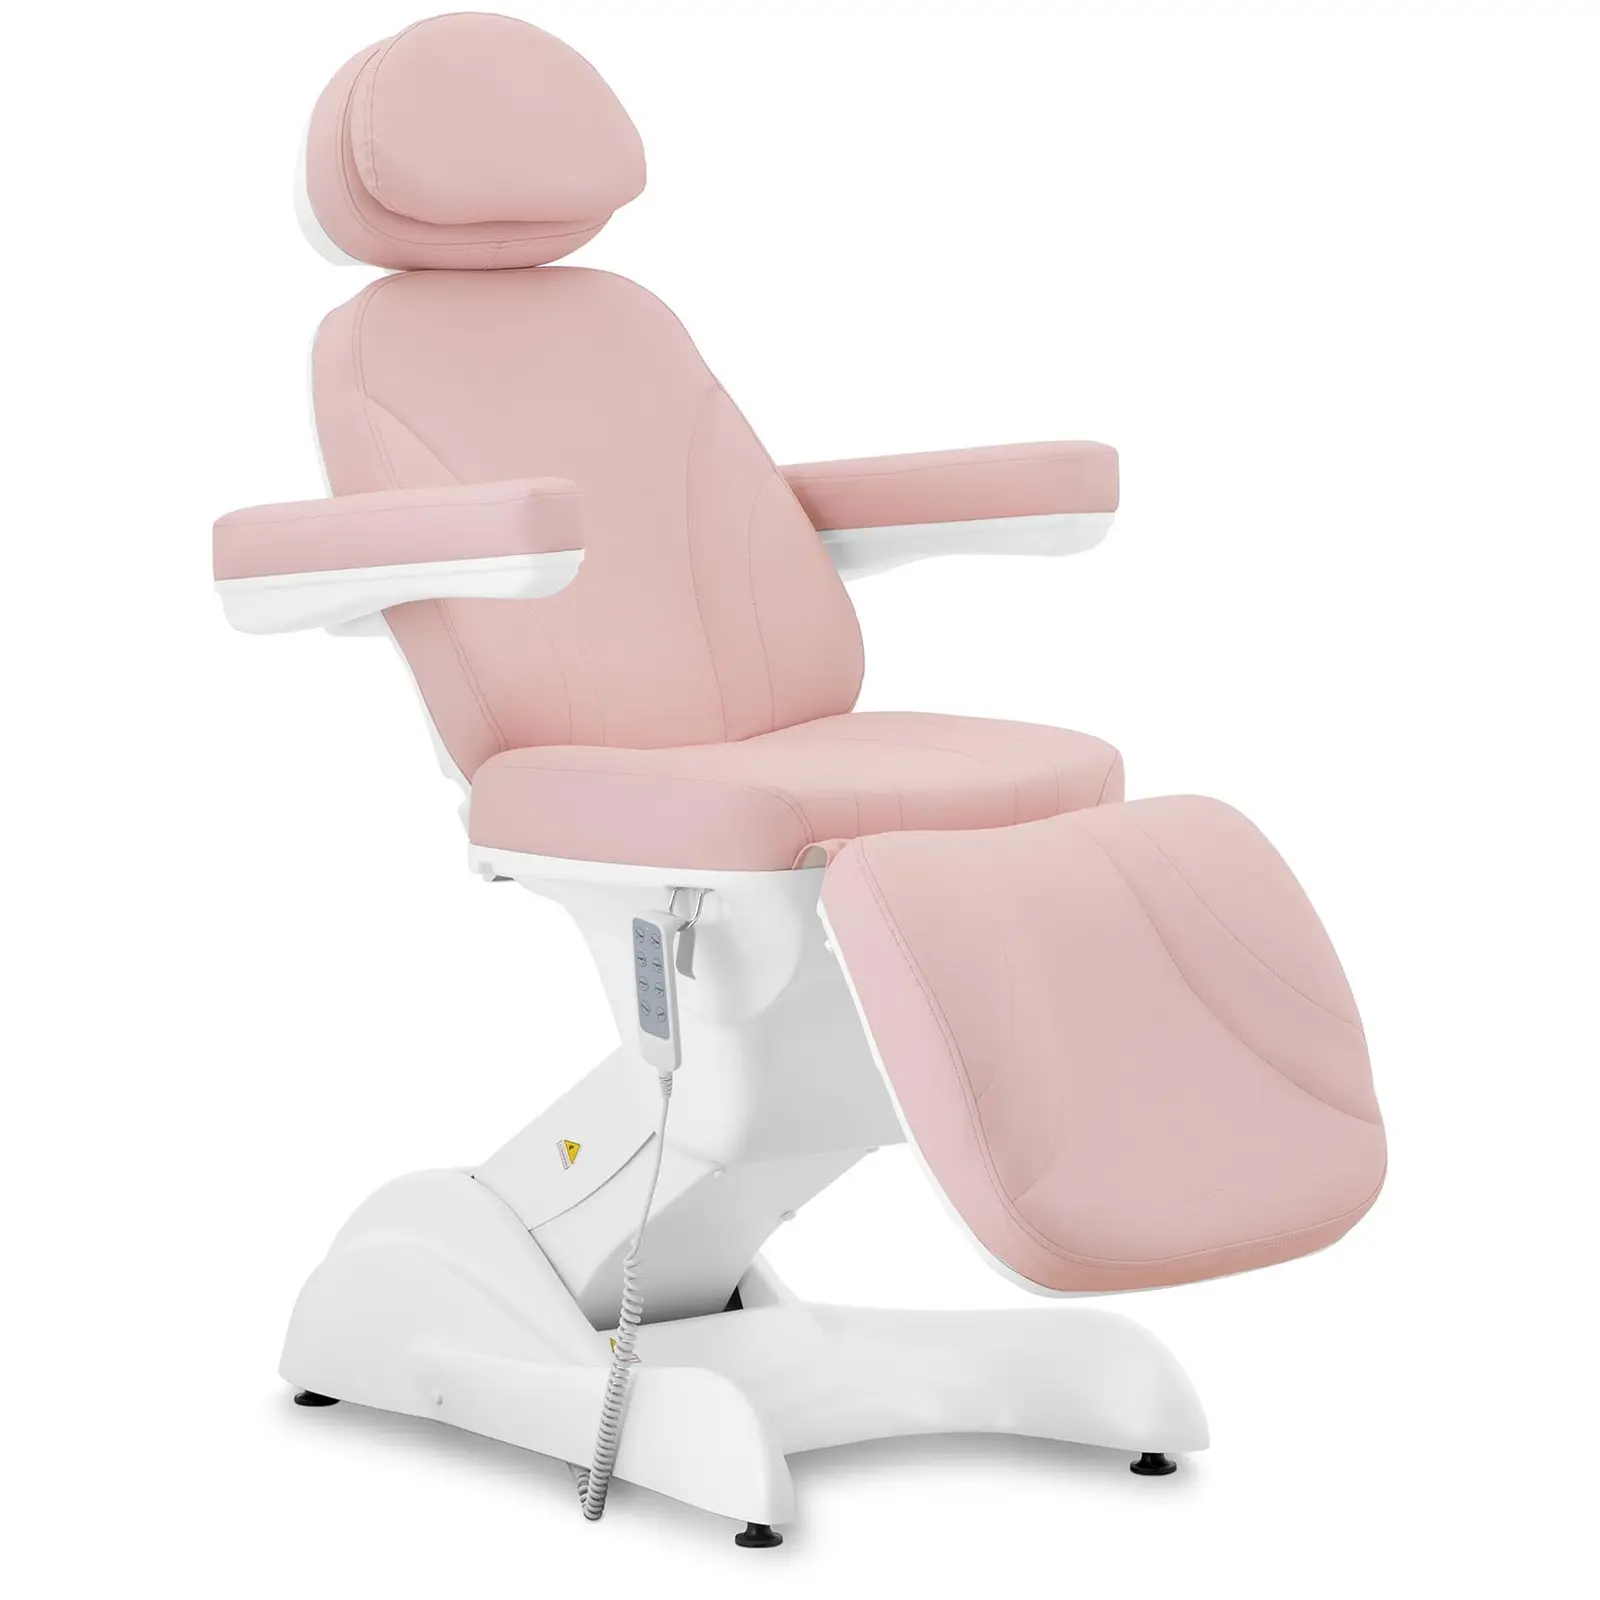 Beauty Chair - 200 W - 150 kg - Pink, White